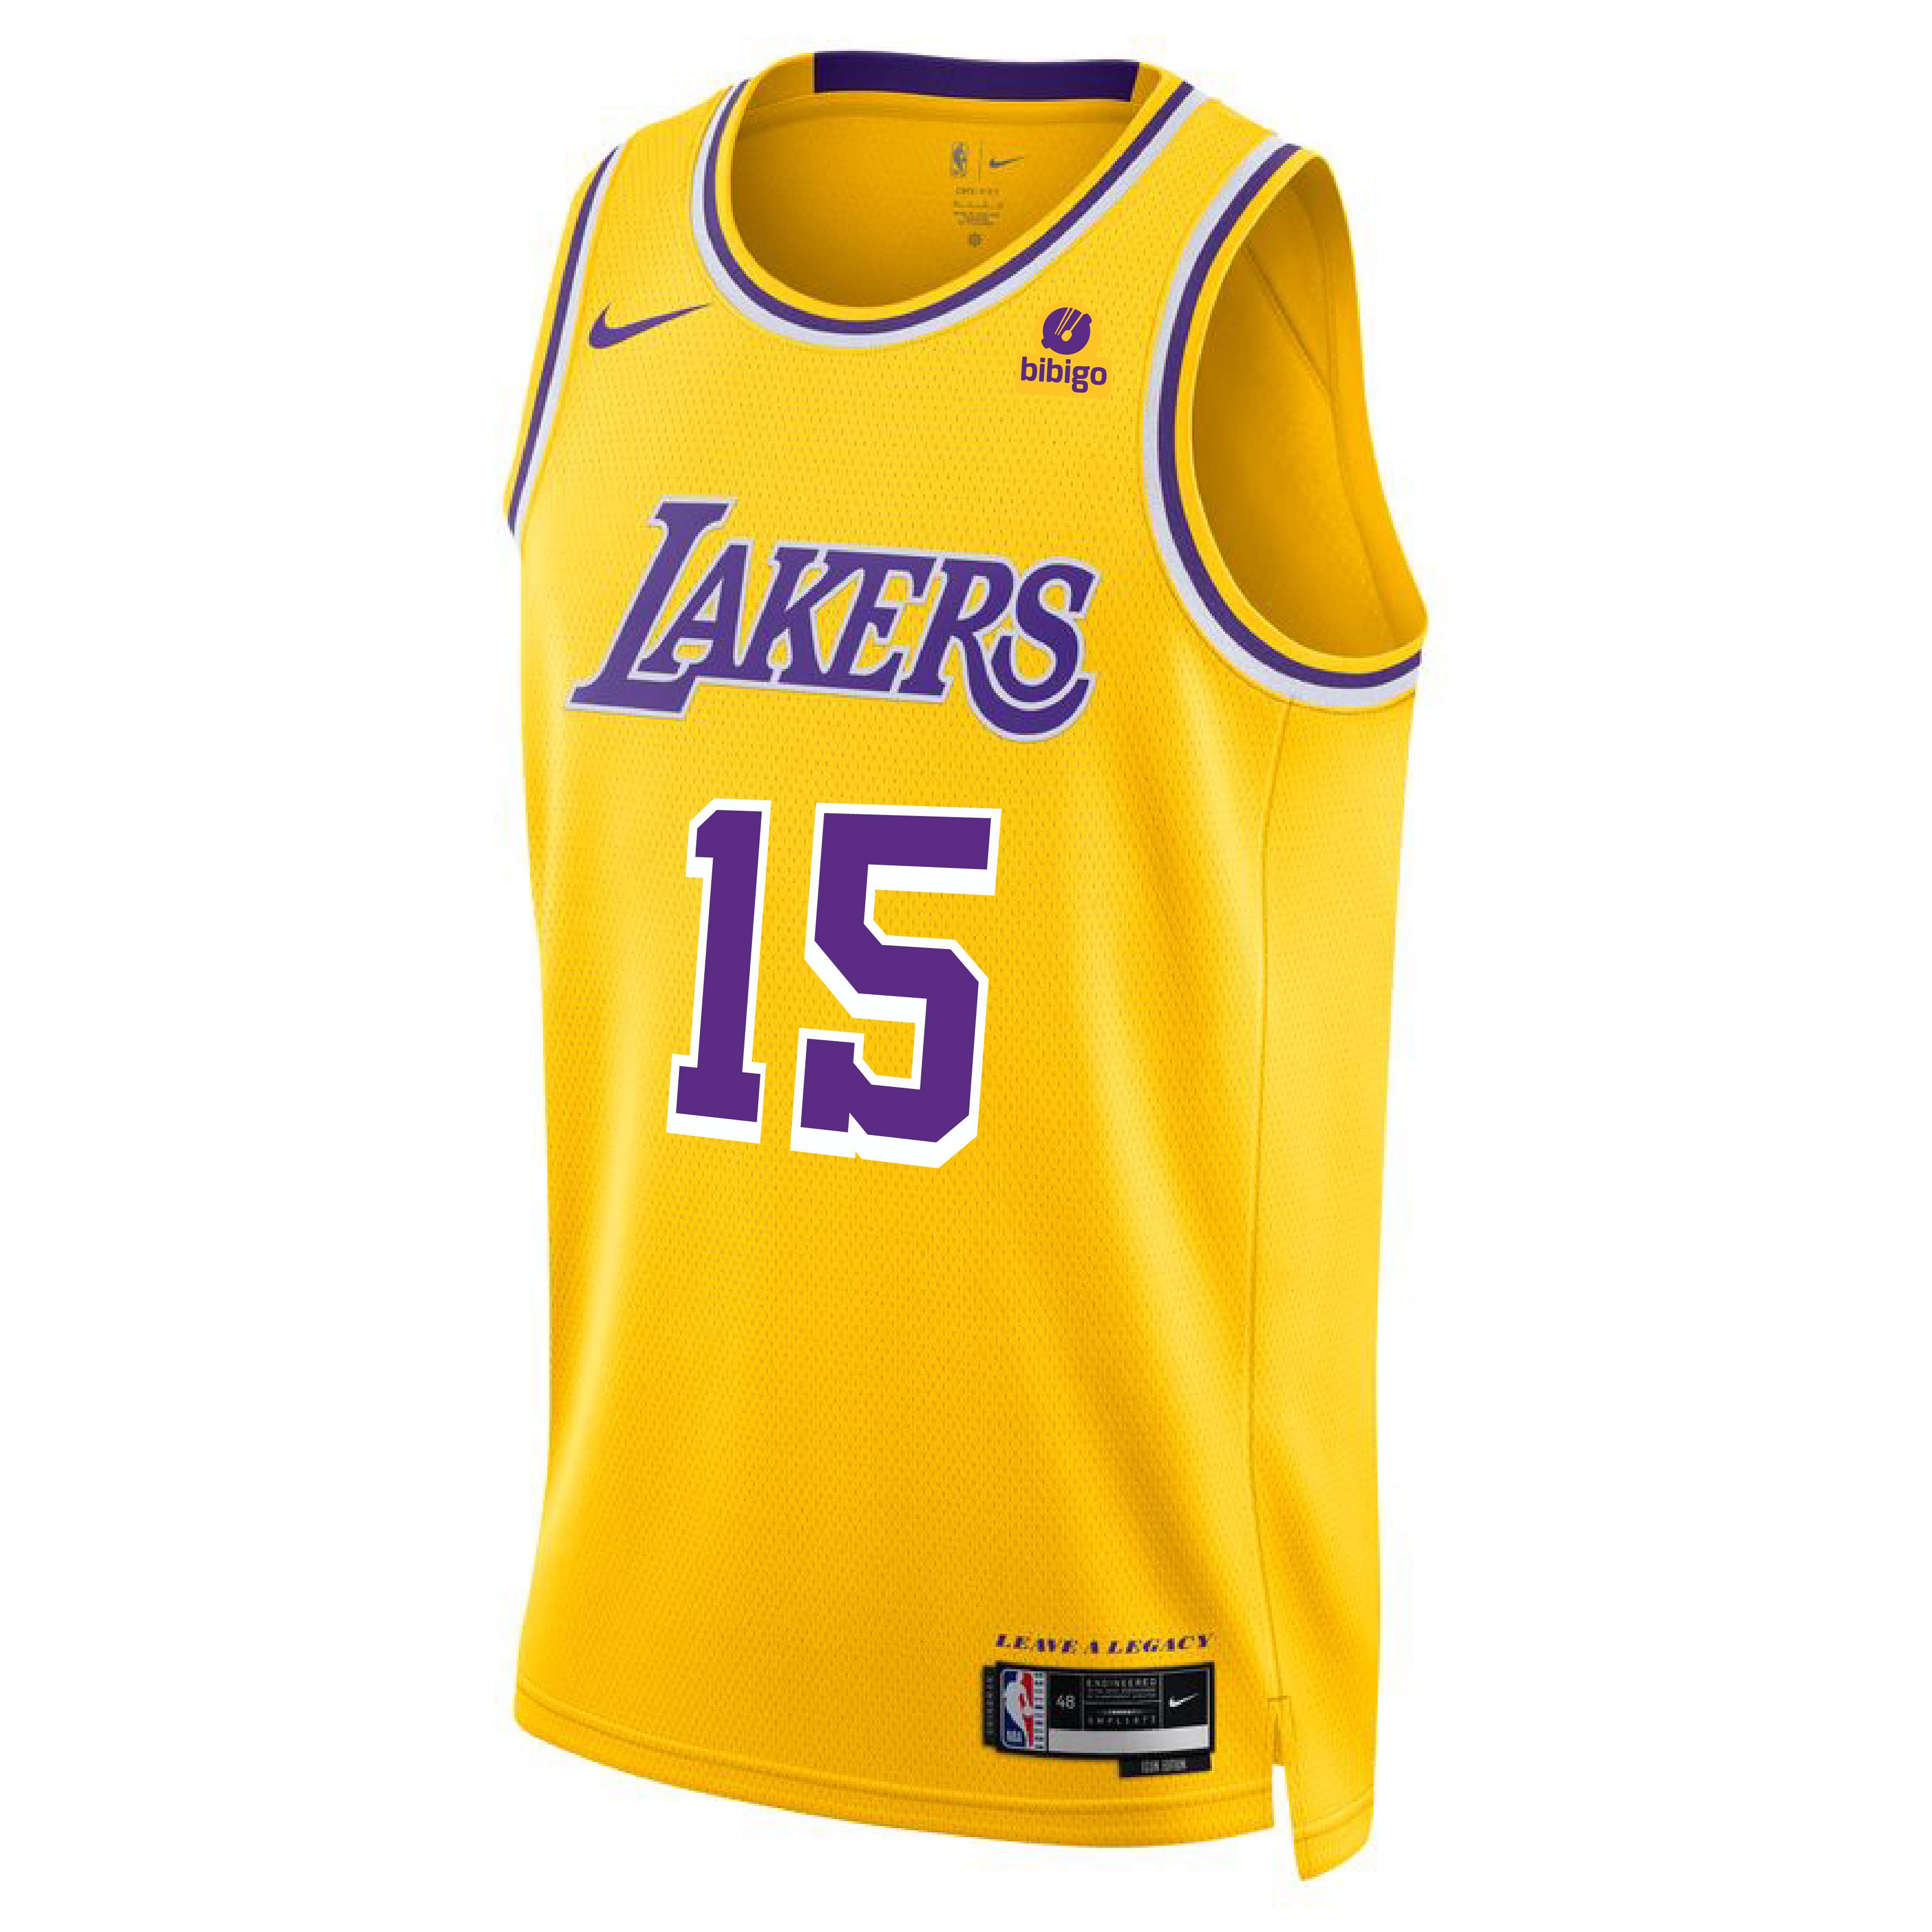 Just Dropped: Nike NBA Connected Jerseys - Lids